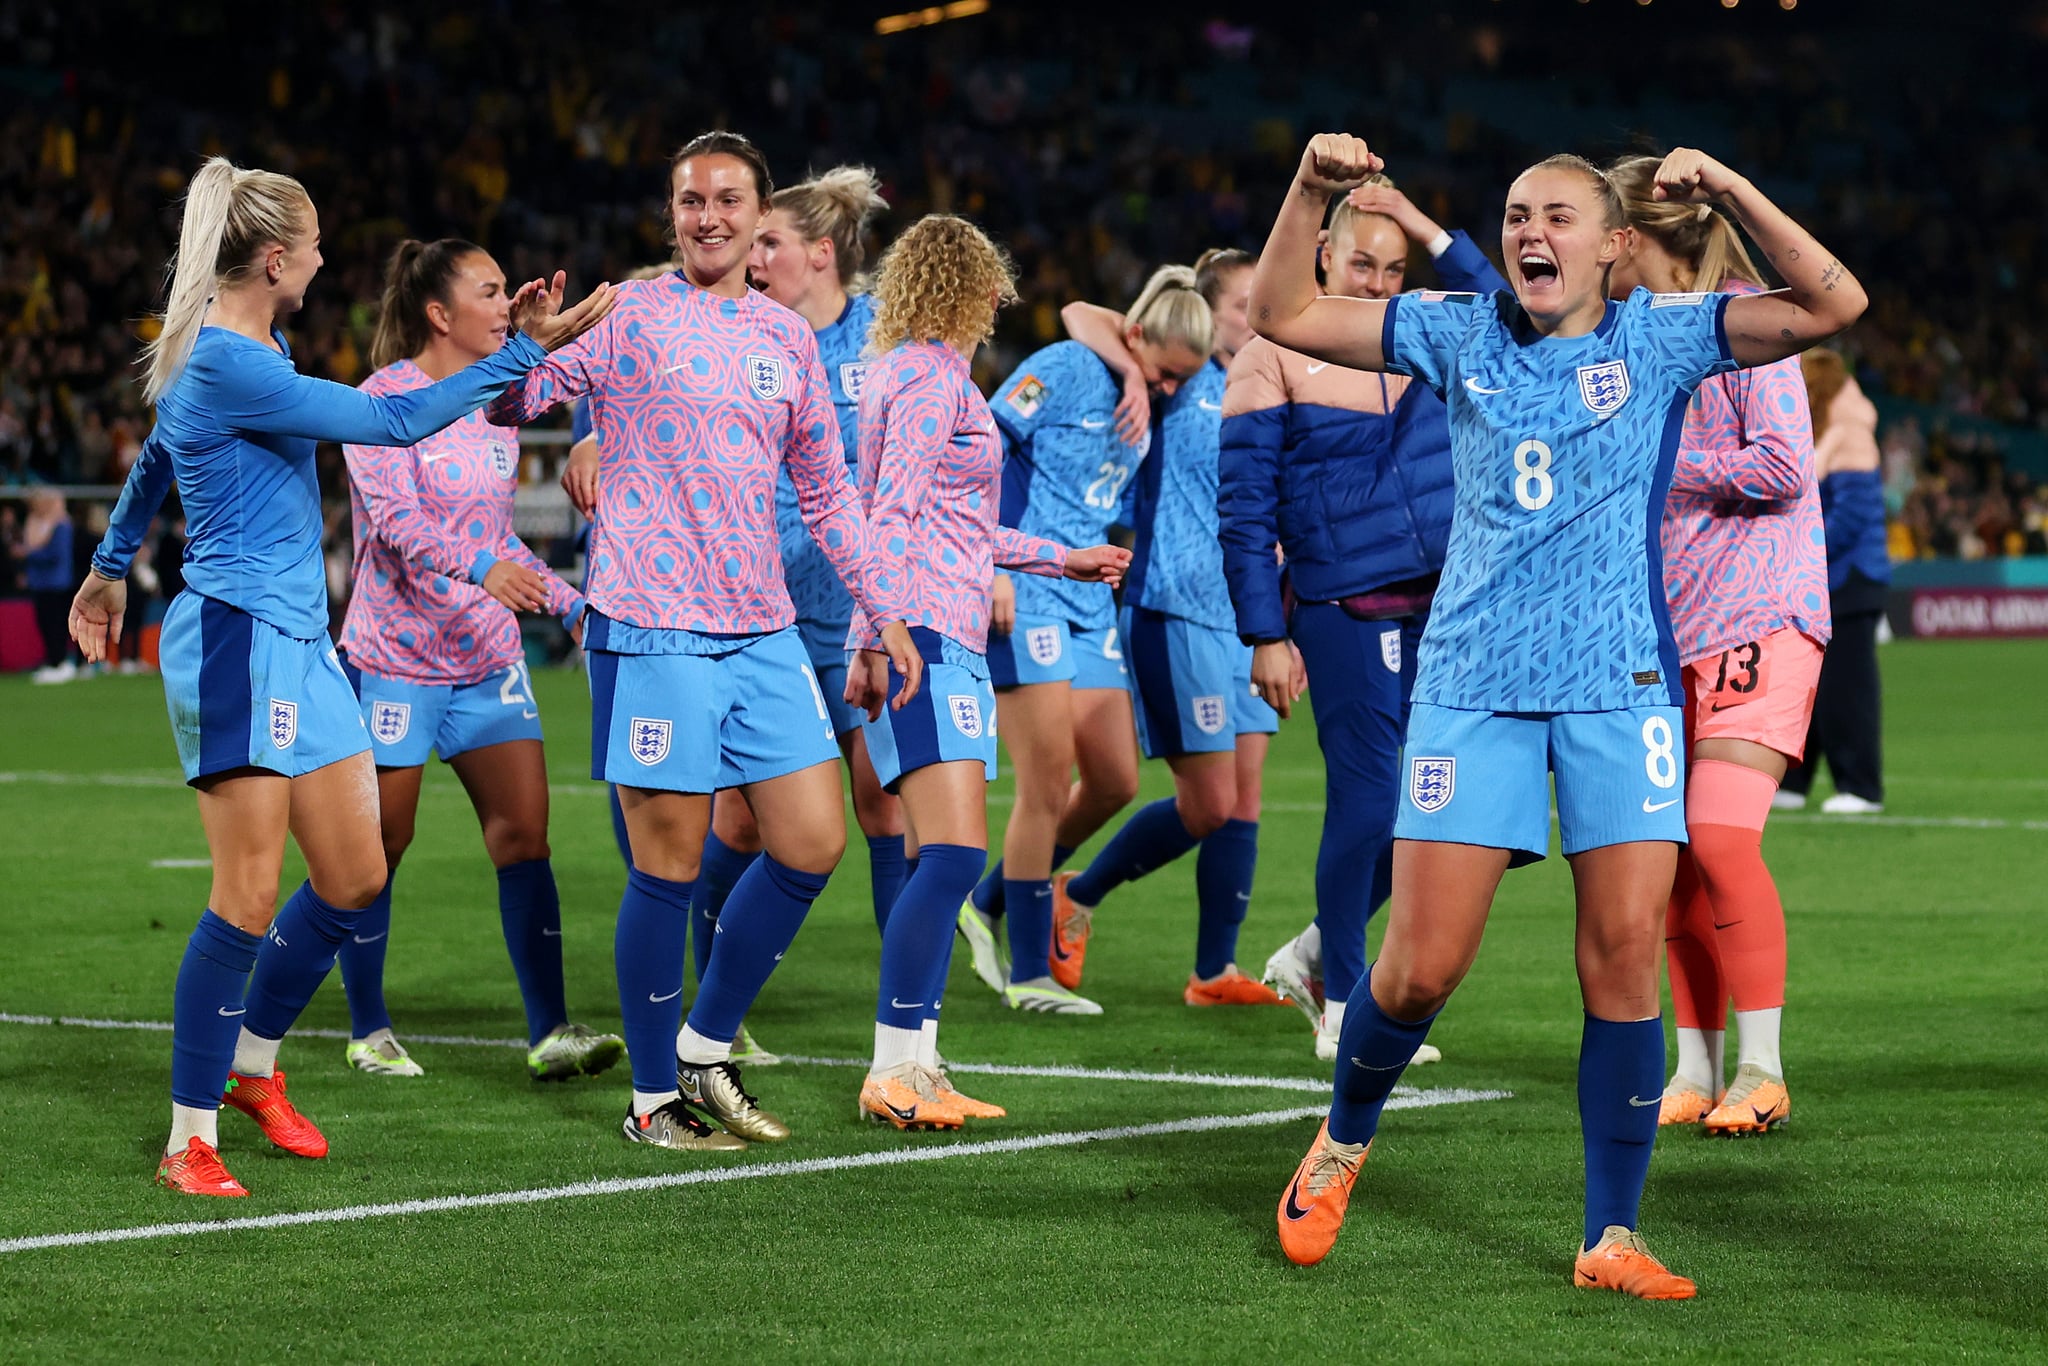 SYDNEY, AUSTRALIA - AUGUST 16: Georgia Stanway and England players celebrate after the team's 3-1 victory and advance to the final following the FIFA Women's World Cup Australia & New Zealand 2023 Semi Final match between Australia and England at Stadium Australia on August 16, 2023 in Sydney, Australia. (Photo by Catherine Ivill/Getty Images)